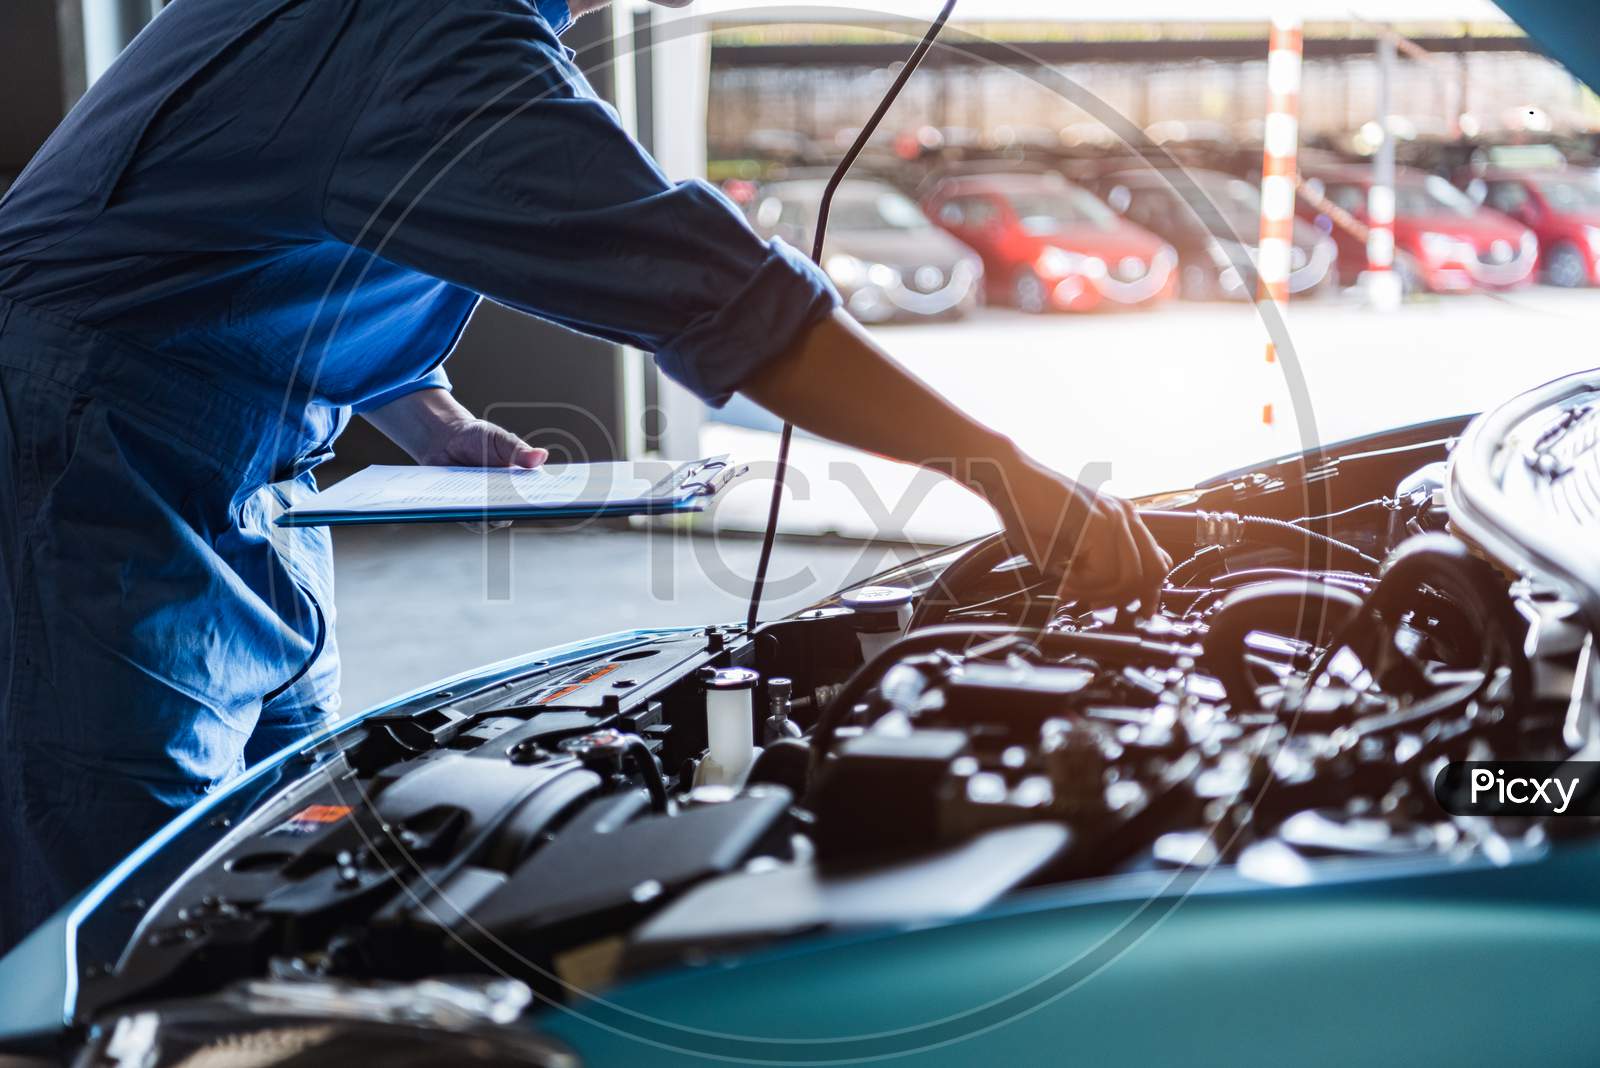 Car Mechanic Holding Clipboard And Checking To Maintenance Vehicle By Customer Claim Order In Auto Repair Shop Garage. Engine Repair Service. People Occupation And Business Job. Automobile Technician